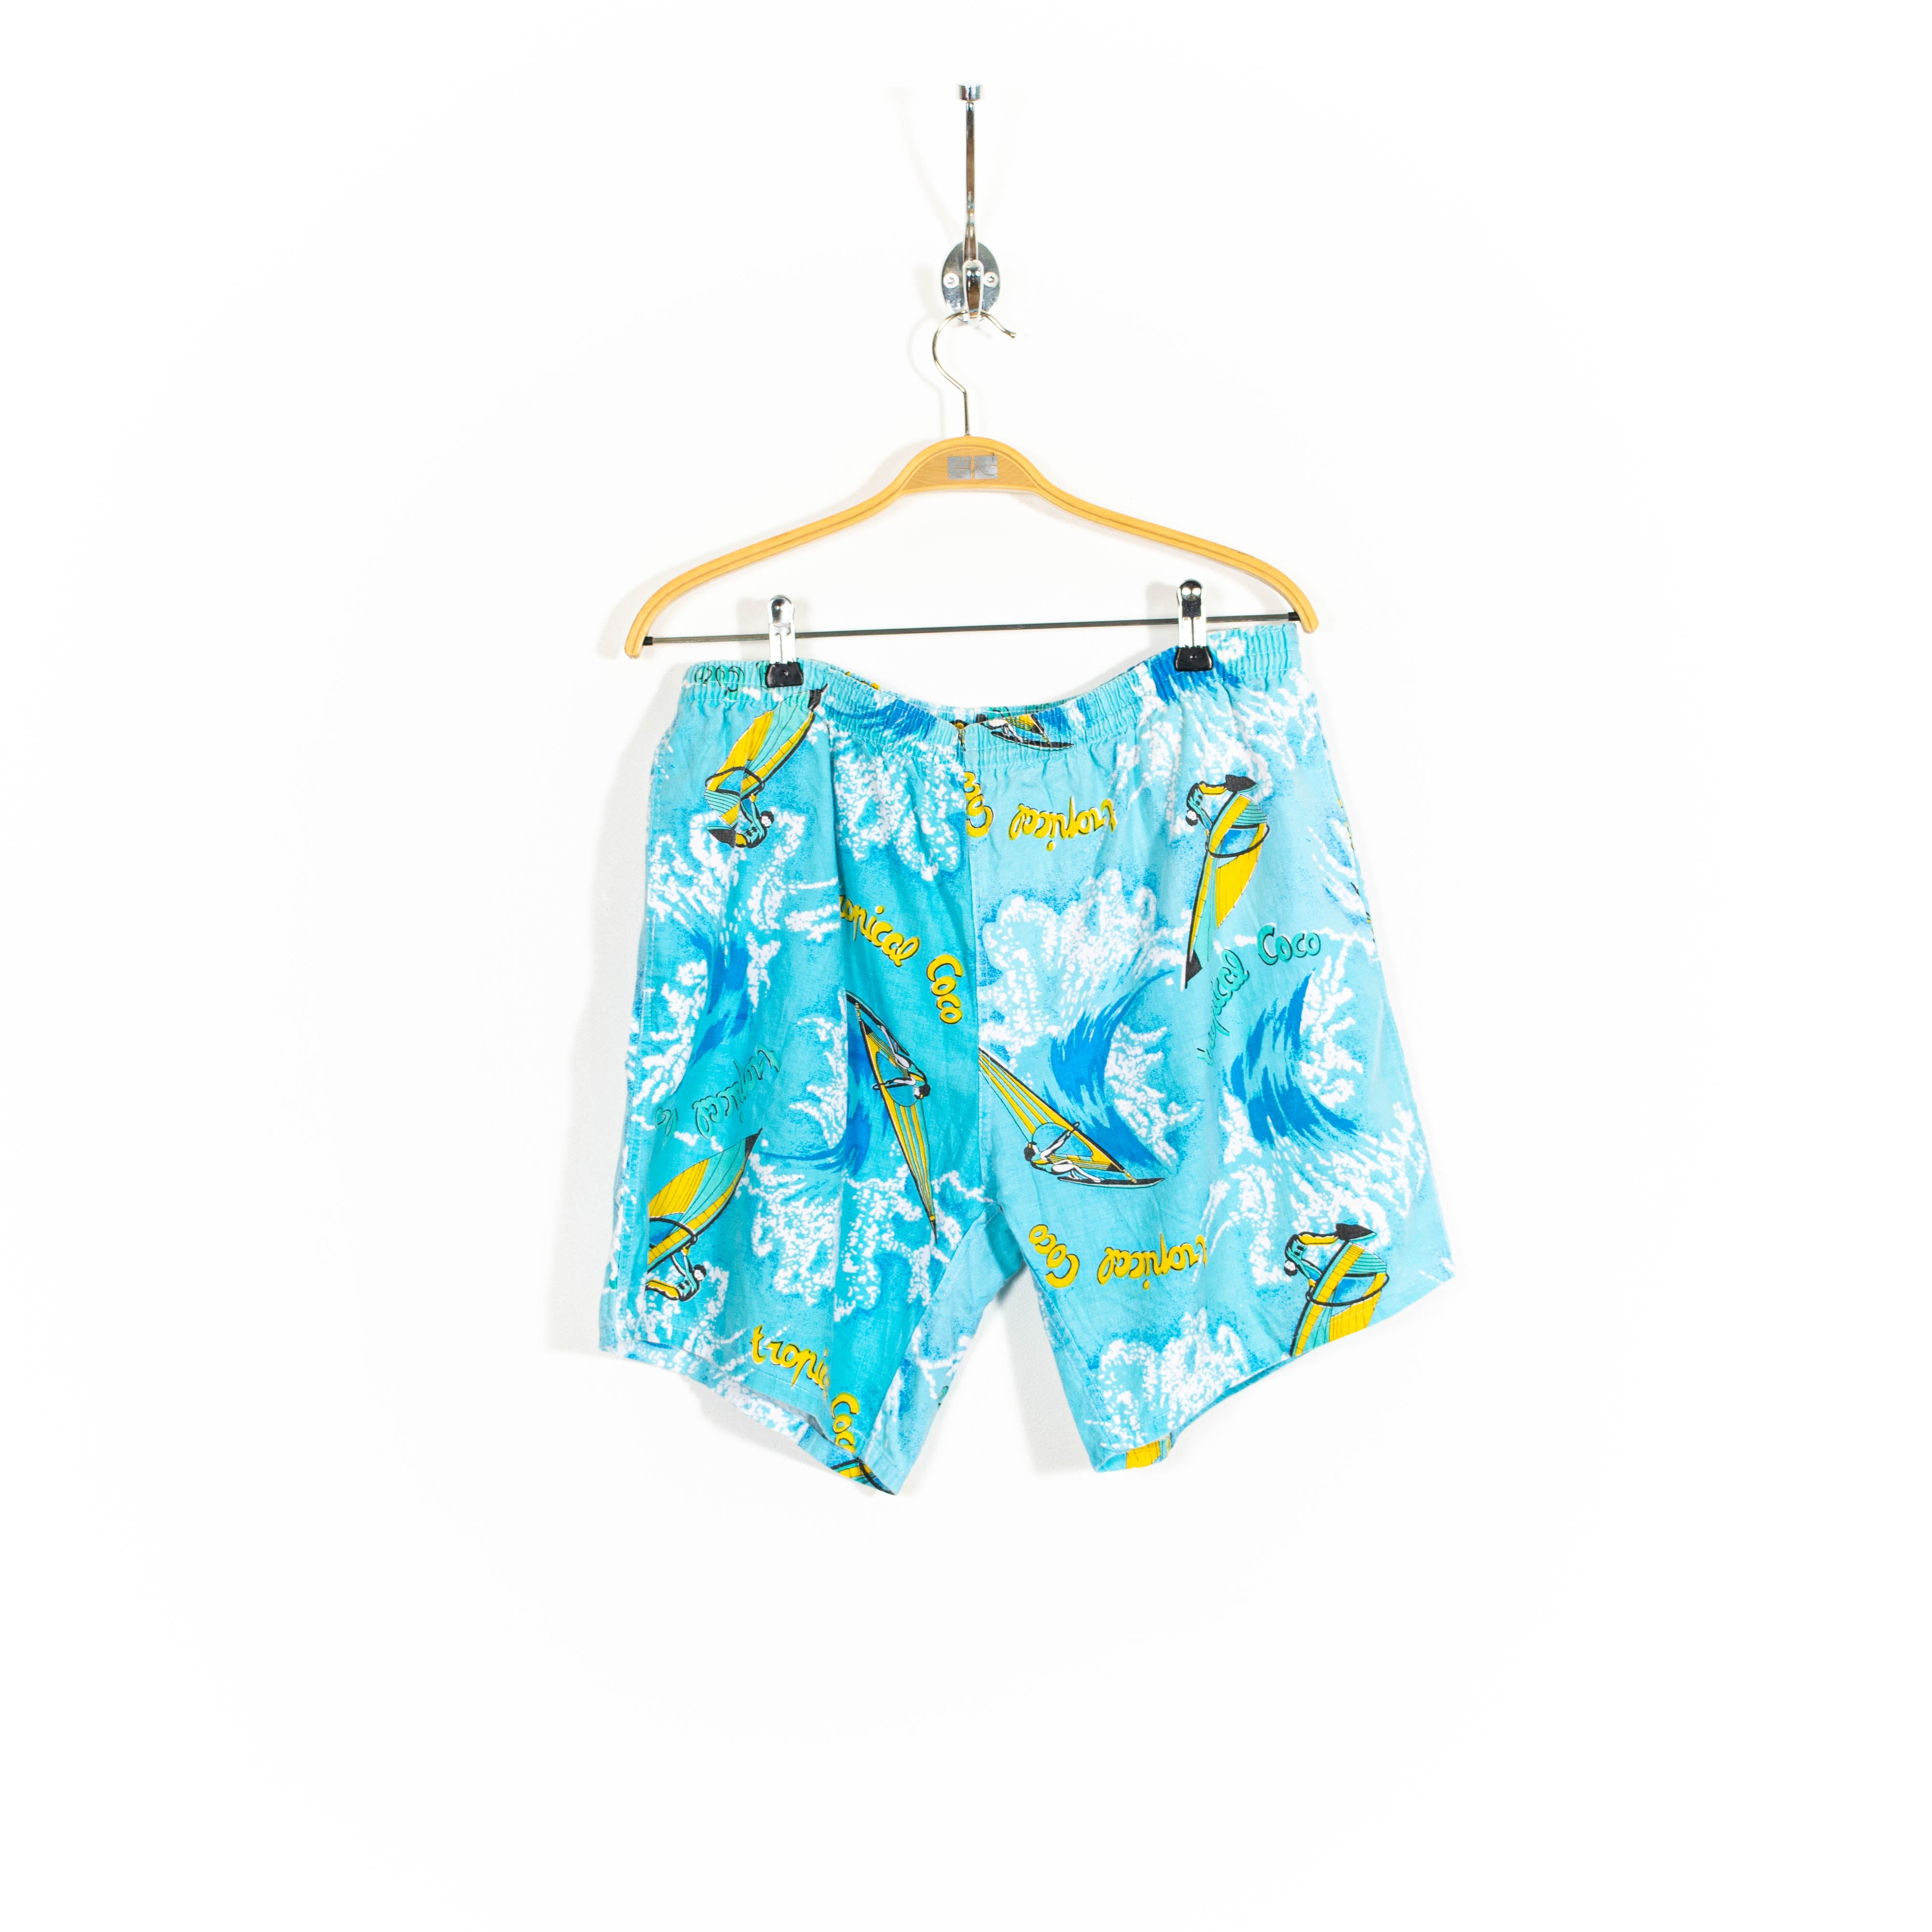 Multicolor Surfing Print Swimming Shorts Mens US31